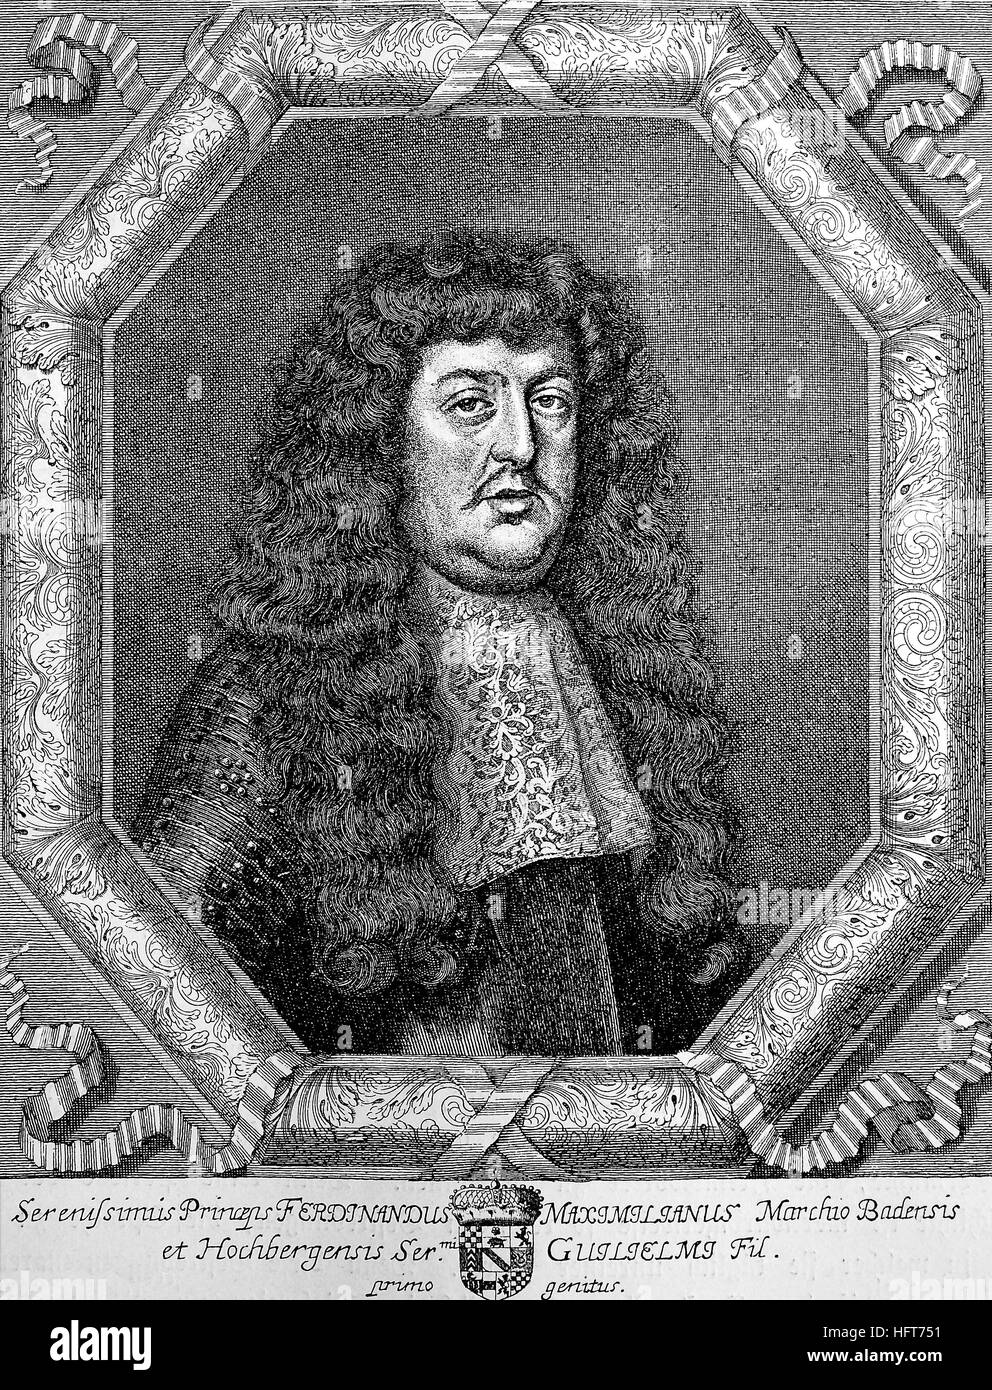 Ferdinand Maximilian of Baden-Baden, Hereditary Prince of Baden-Baden, 1625-1669, was the father of the famous general Louis William, Margrave of Baden-Baden, woodcut from the year 1885, digital improved Stock Photo